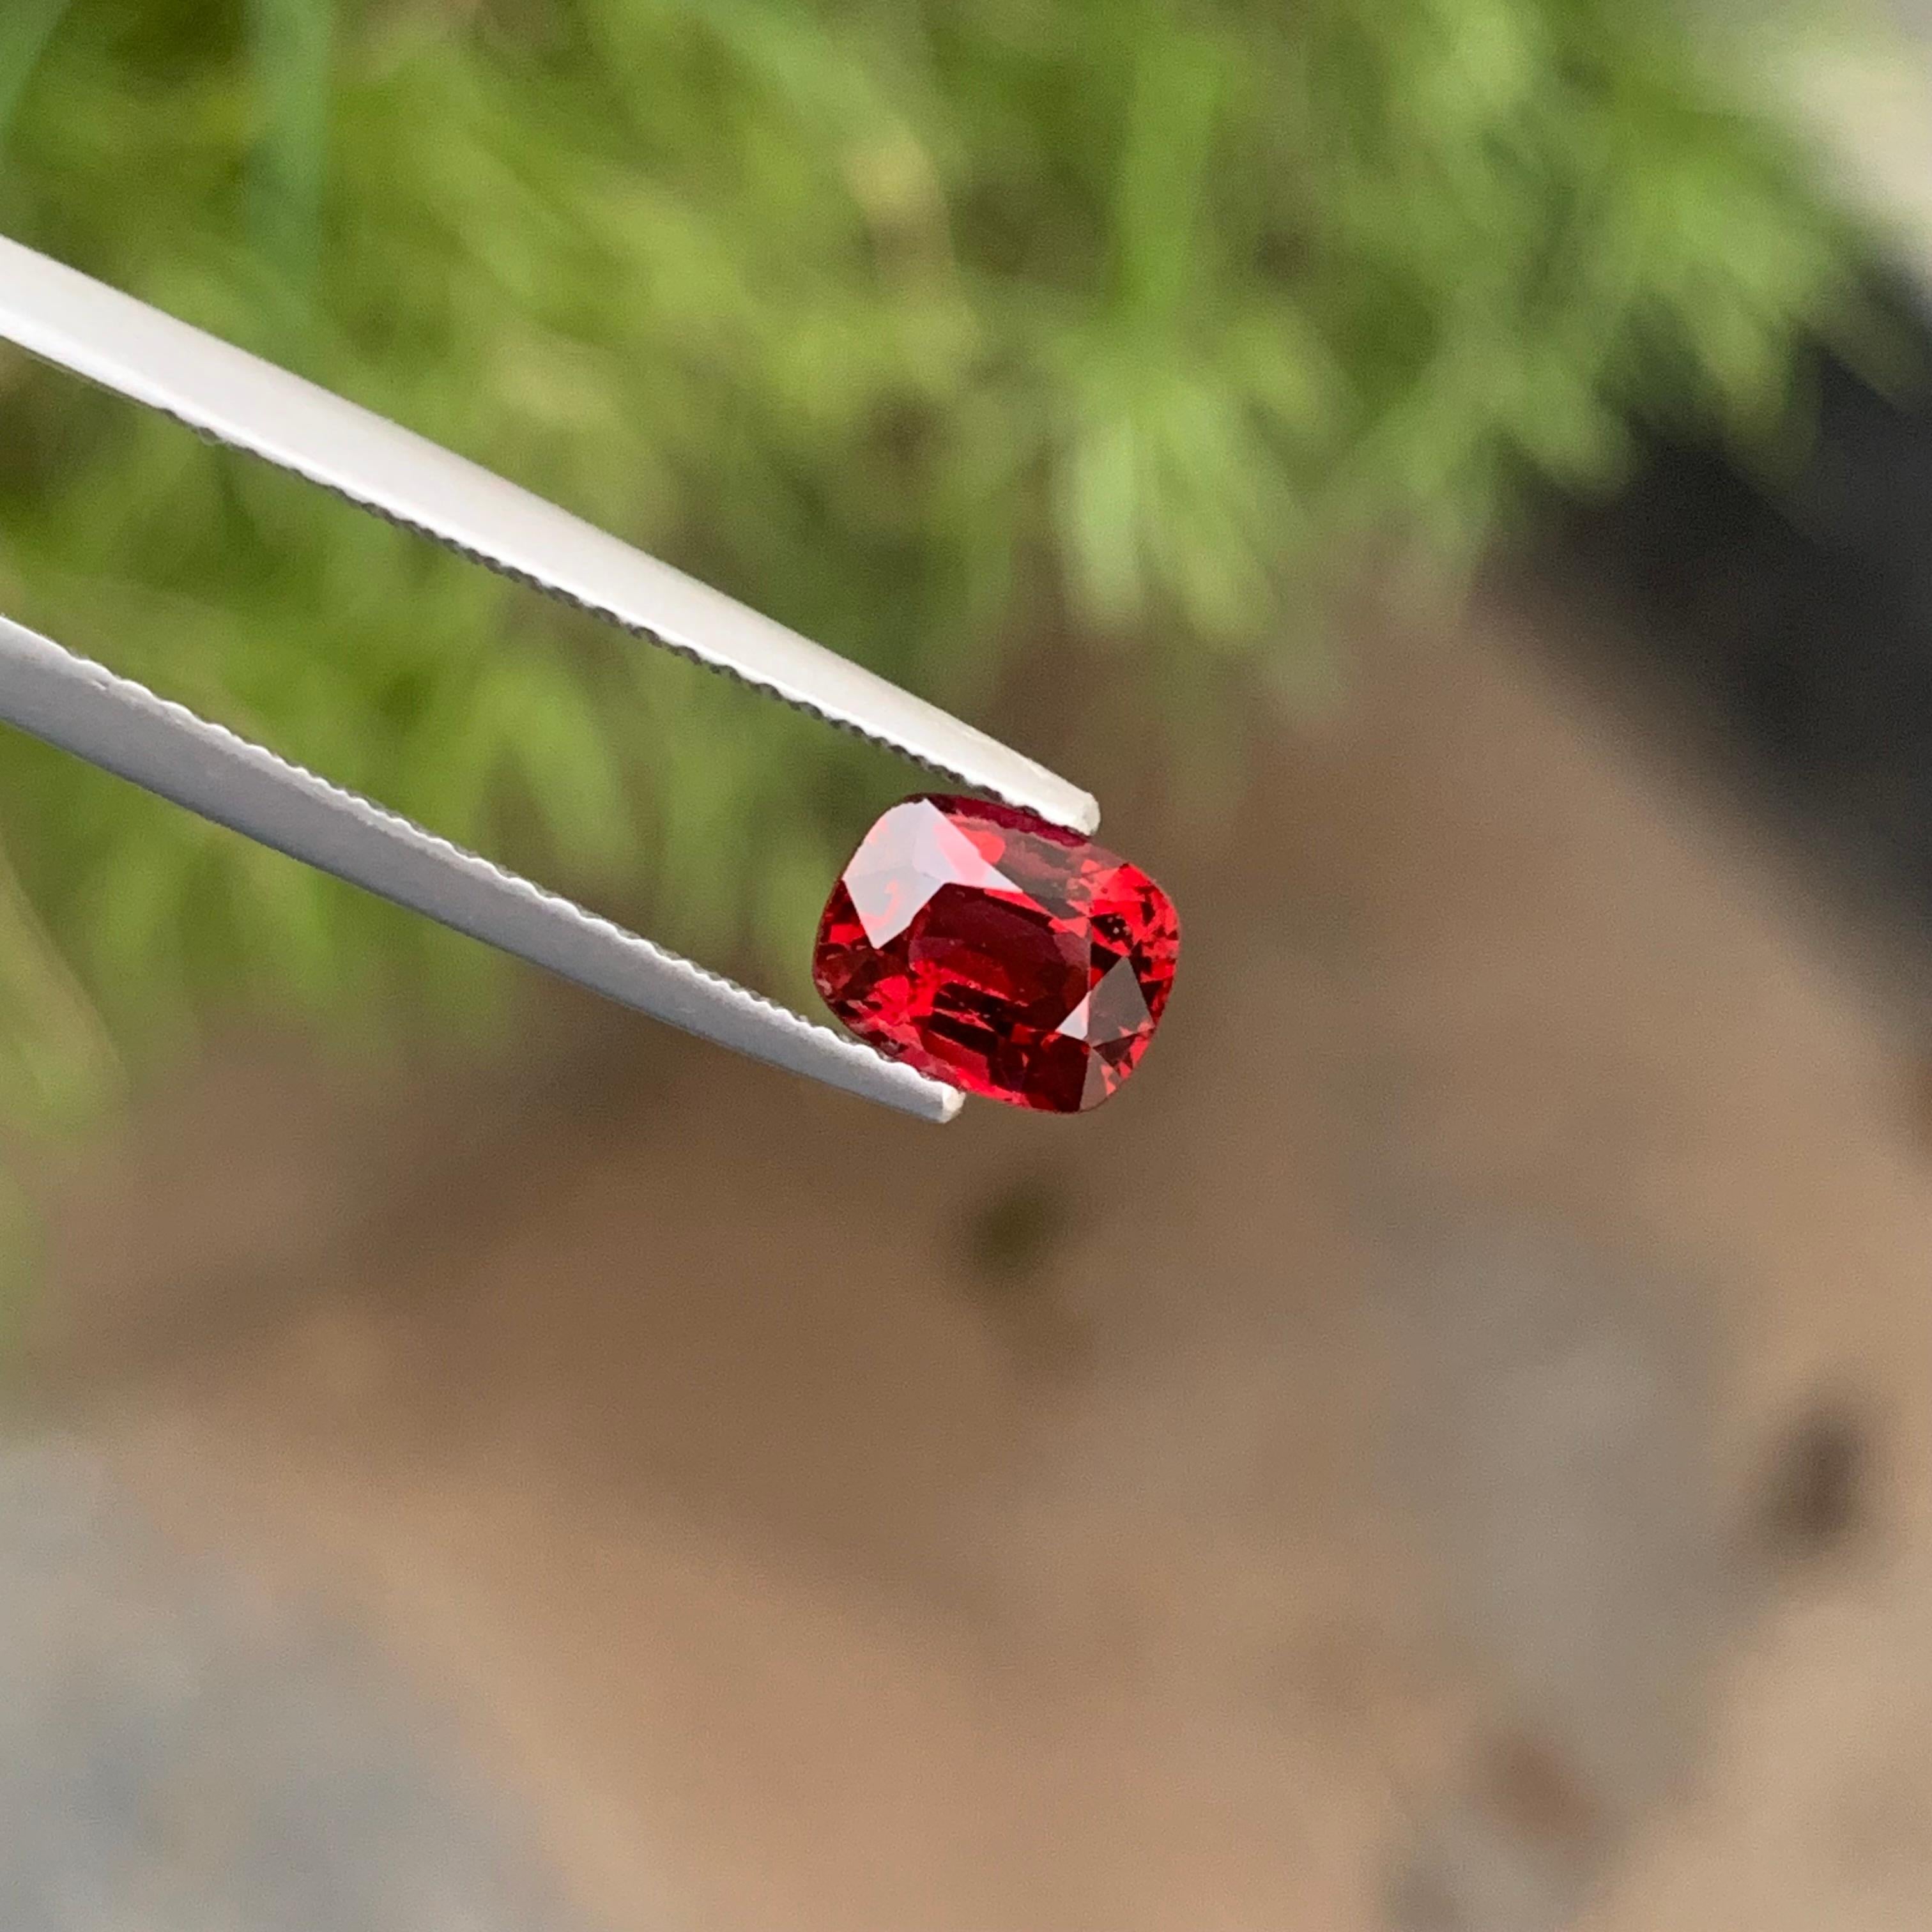 Exceptional 1.15 Carat Natural Loose Red Spinel From Burma Myanmar For Sale 4